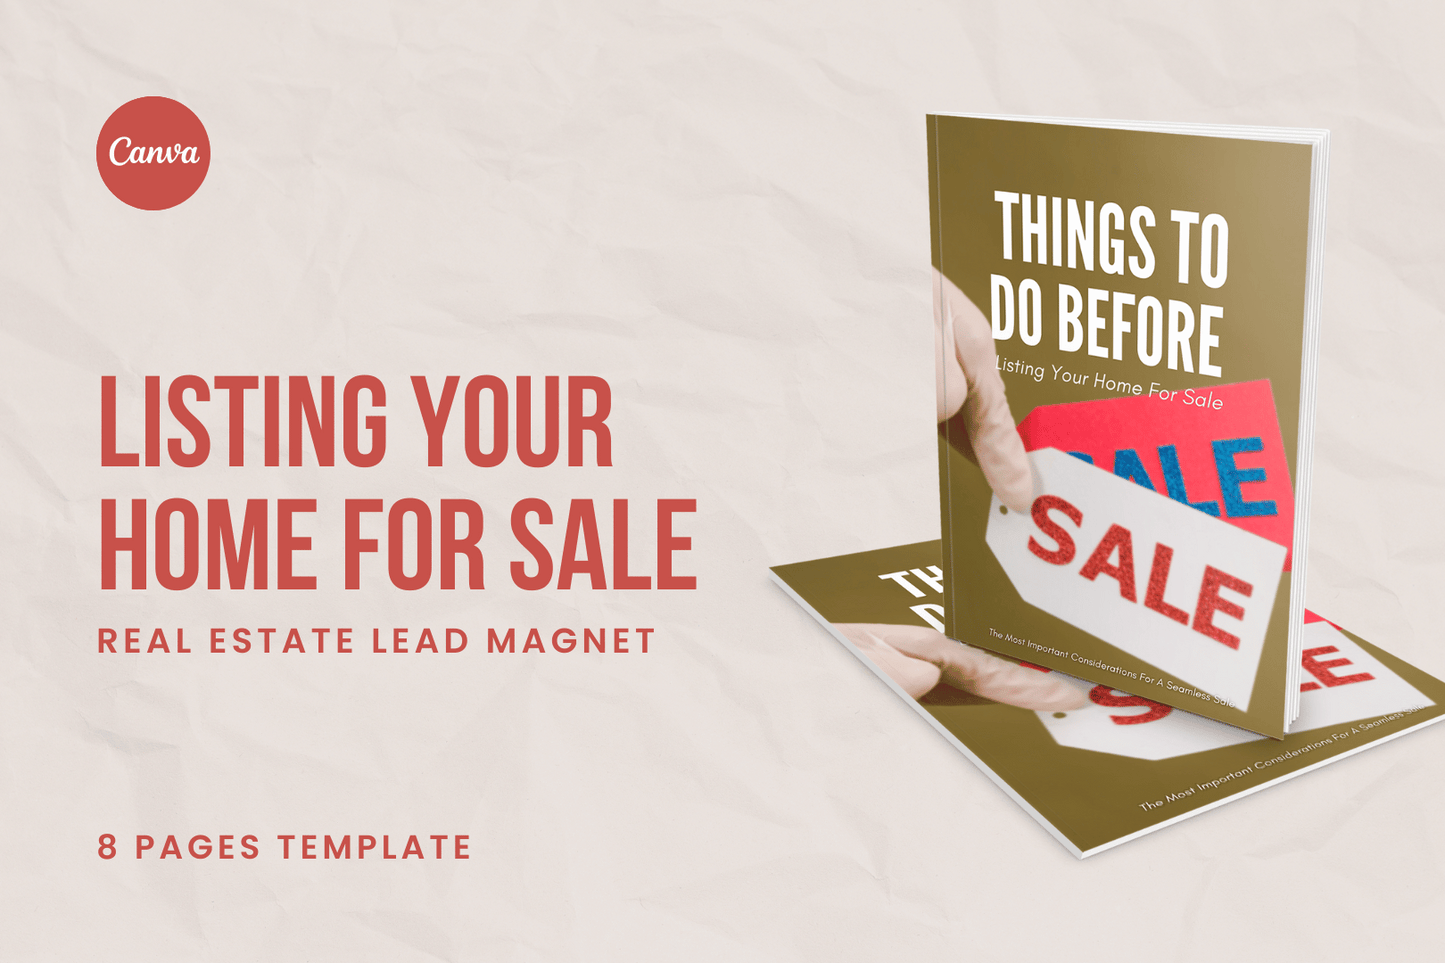 Listing Your Home for Sale - Real Estate Lead Magnet Template